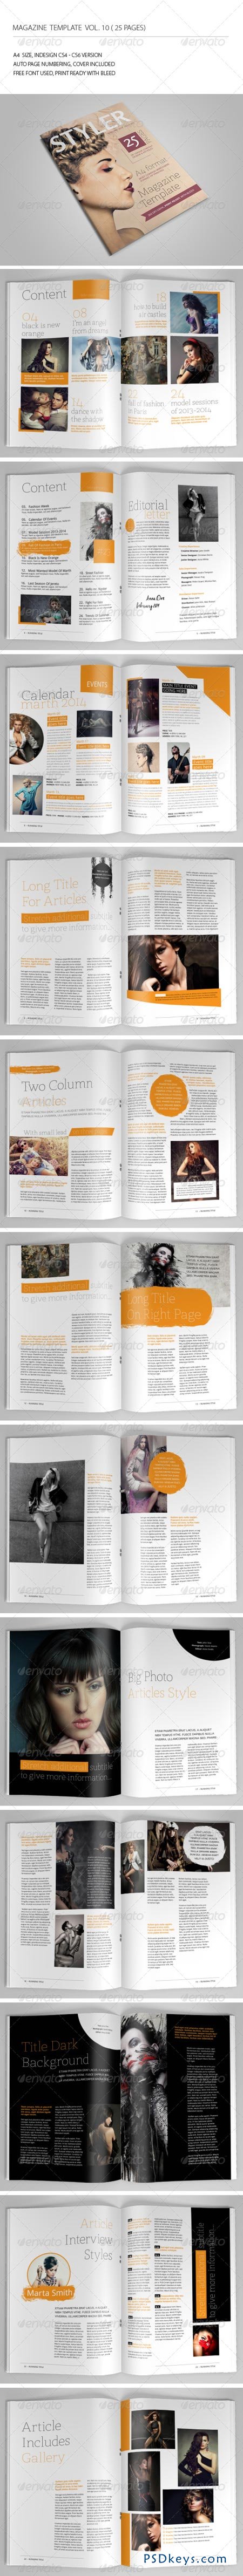 GraphicRiver 25 Pages Magazine Template Vol10 6901013